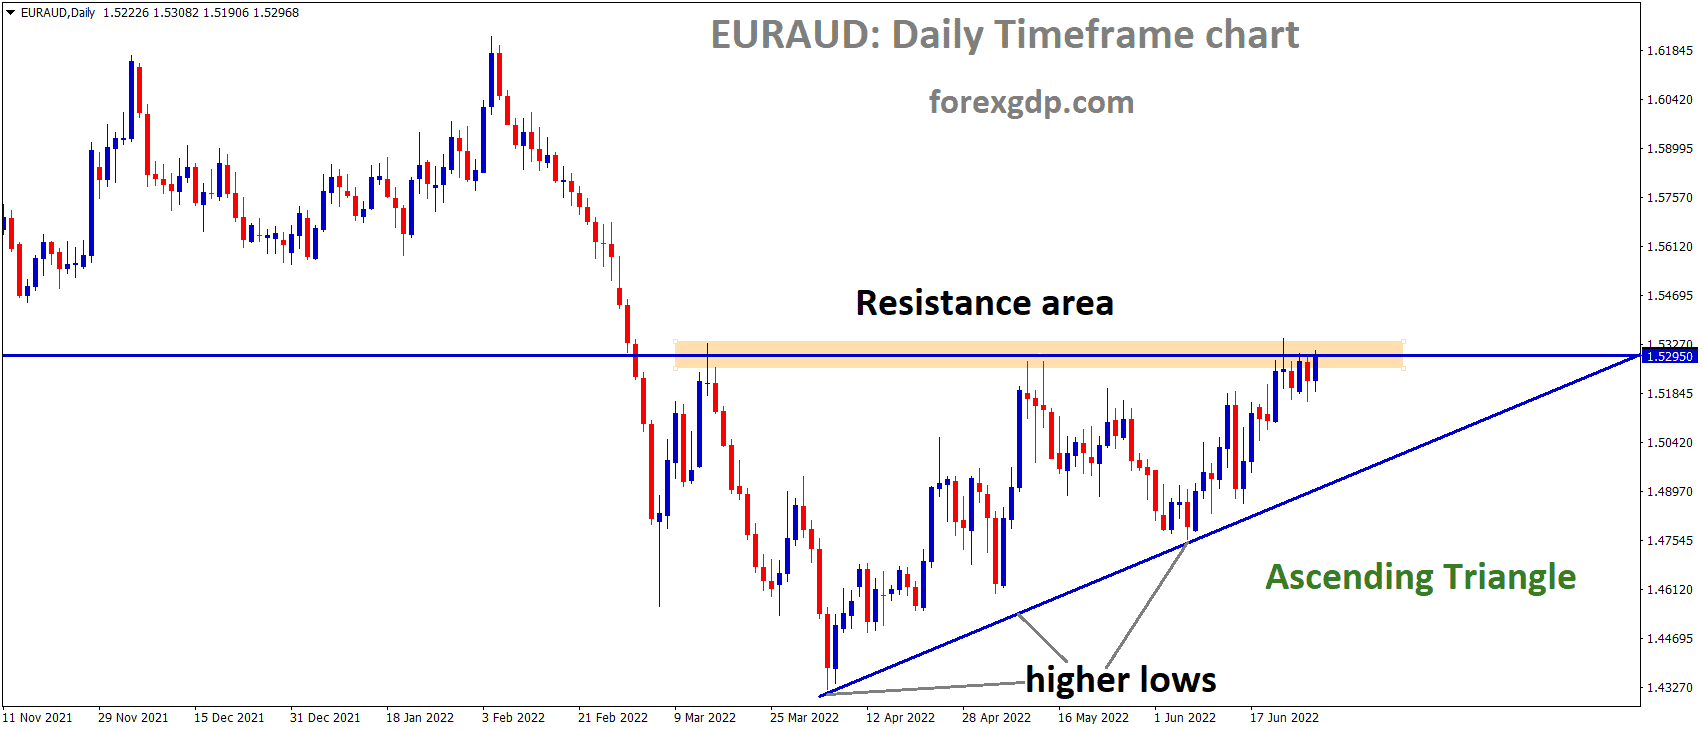 EURAUD is moving in an Ascending triangle pattern and the Market has reached the horizontal resistance area of the Pattern